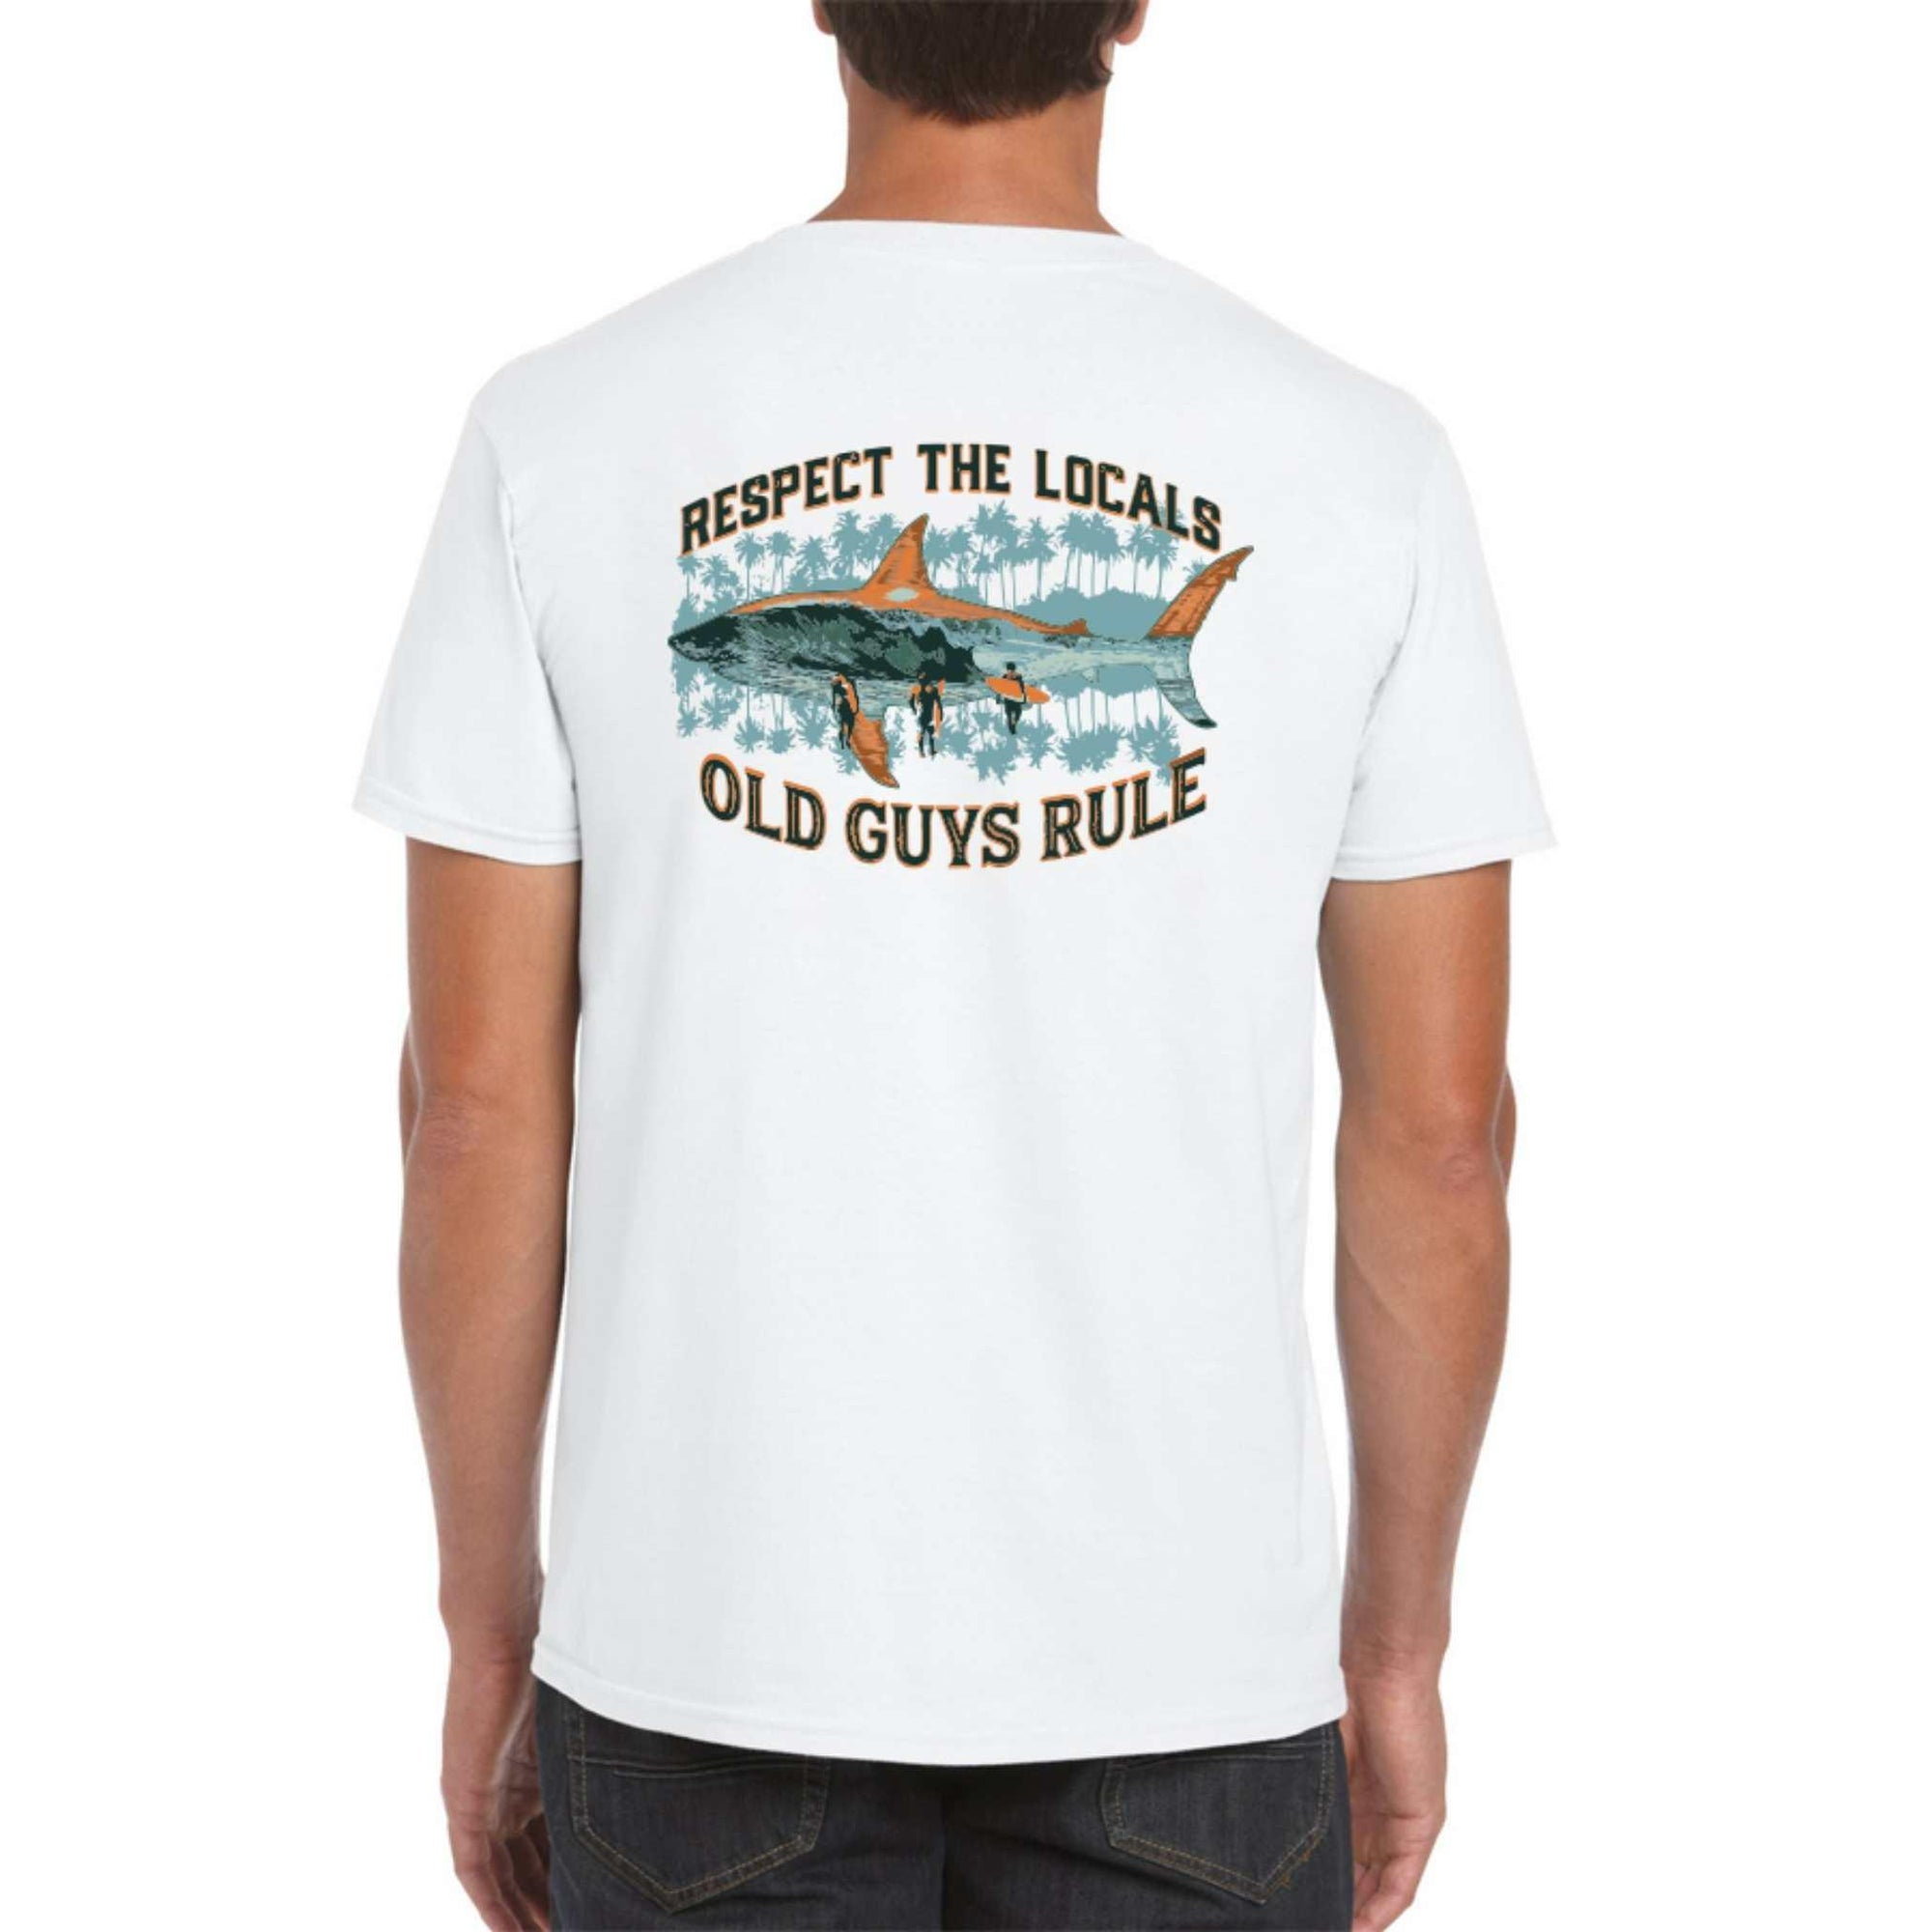 OLD GUYS RULE T SHIRT Local Respect Tee